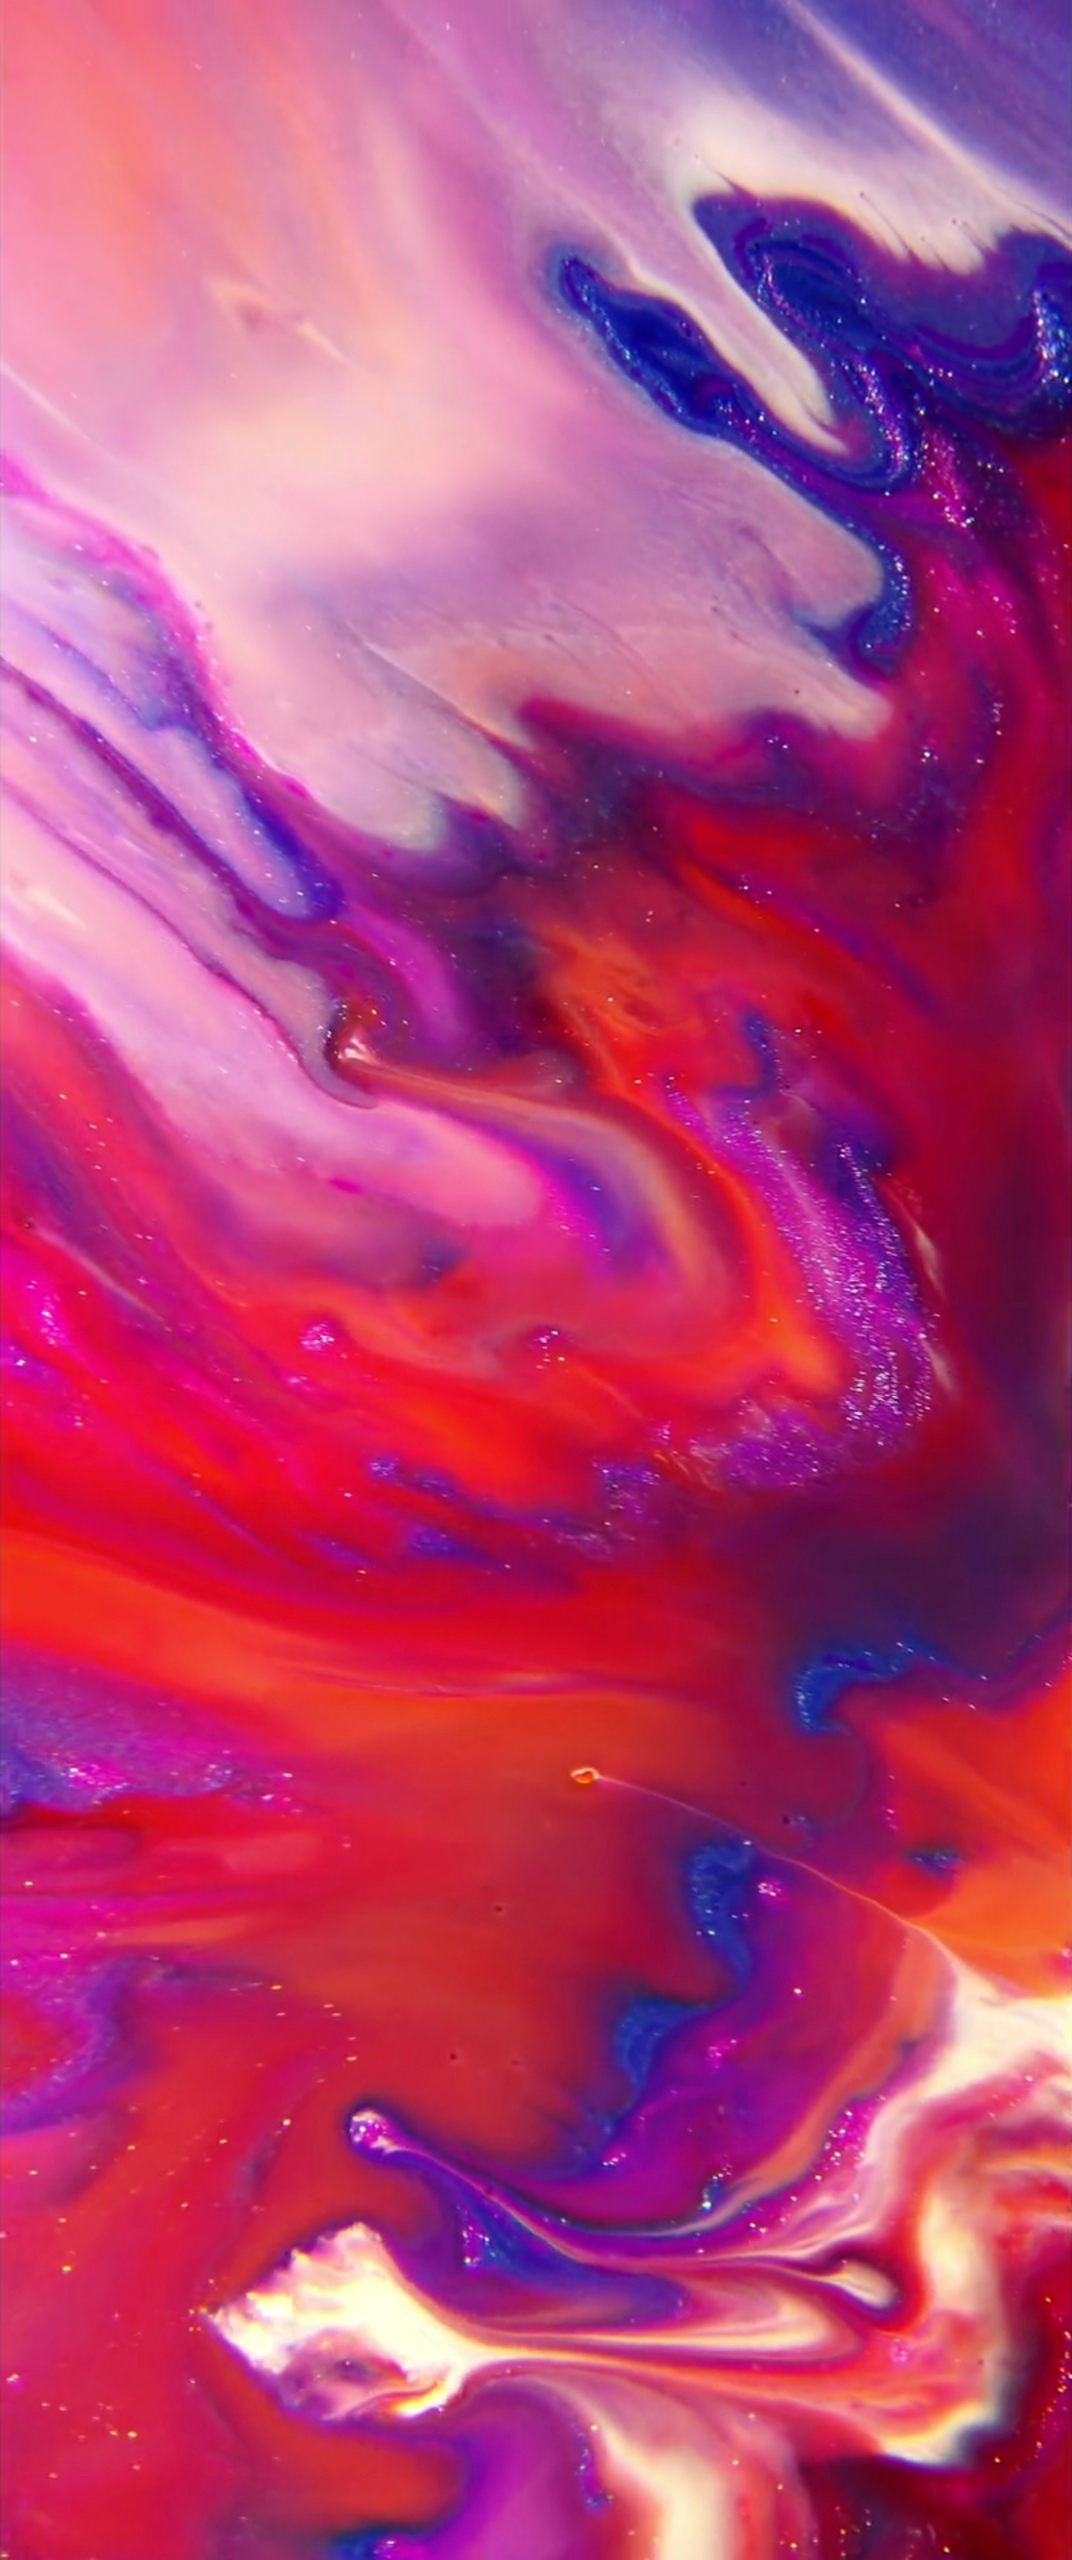 iPhone X marketing video wallpapers